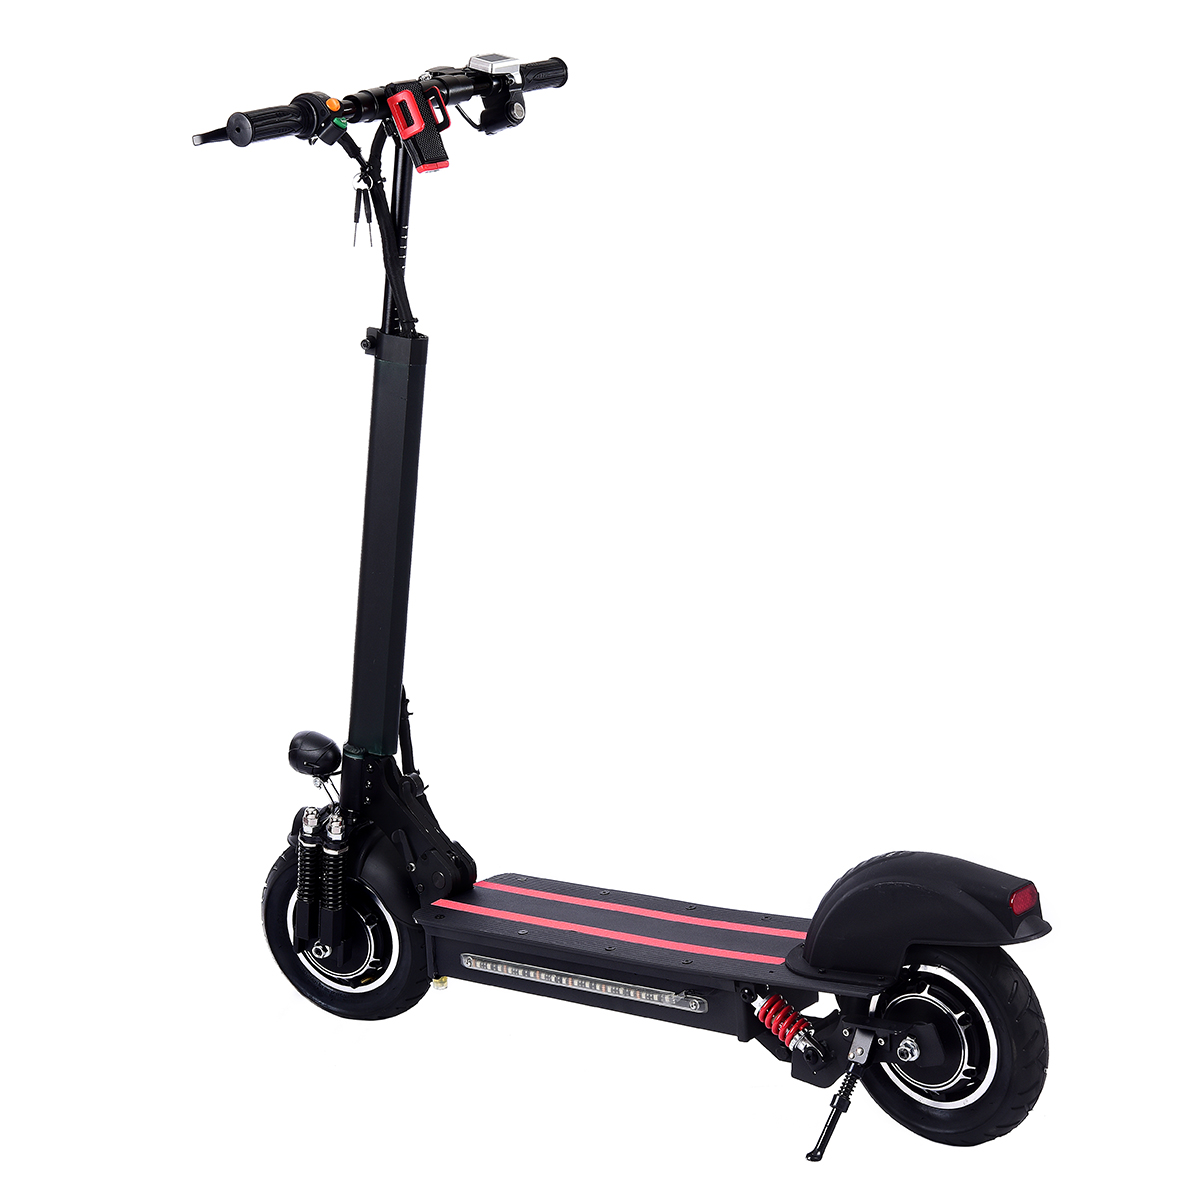 Find [EU DIRECT] Lamtwheel 48V 22Ah 600W*2 Dual Motor 10 inch Tire Electric Scooter 45km Mileage Range 120kg Max Load E-Scooter for Sale on Gipsybee.com with cryptocurrencies